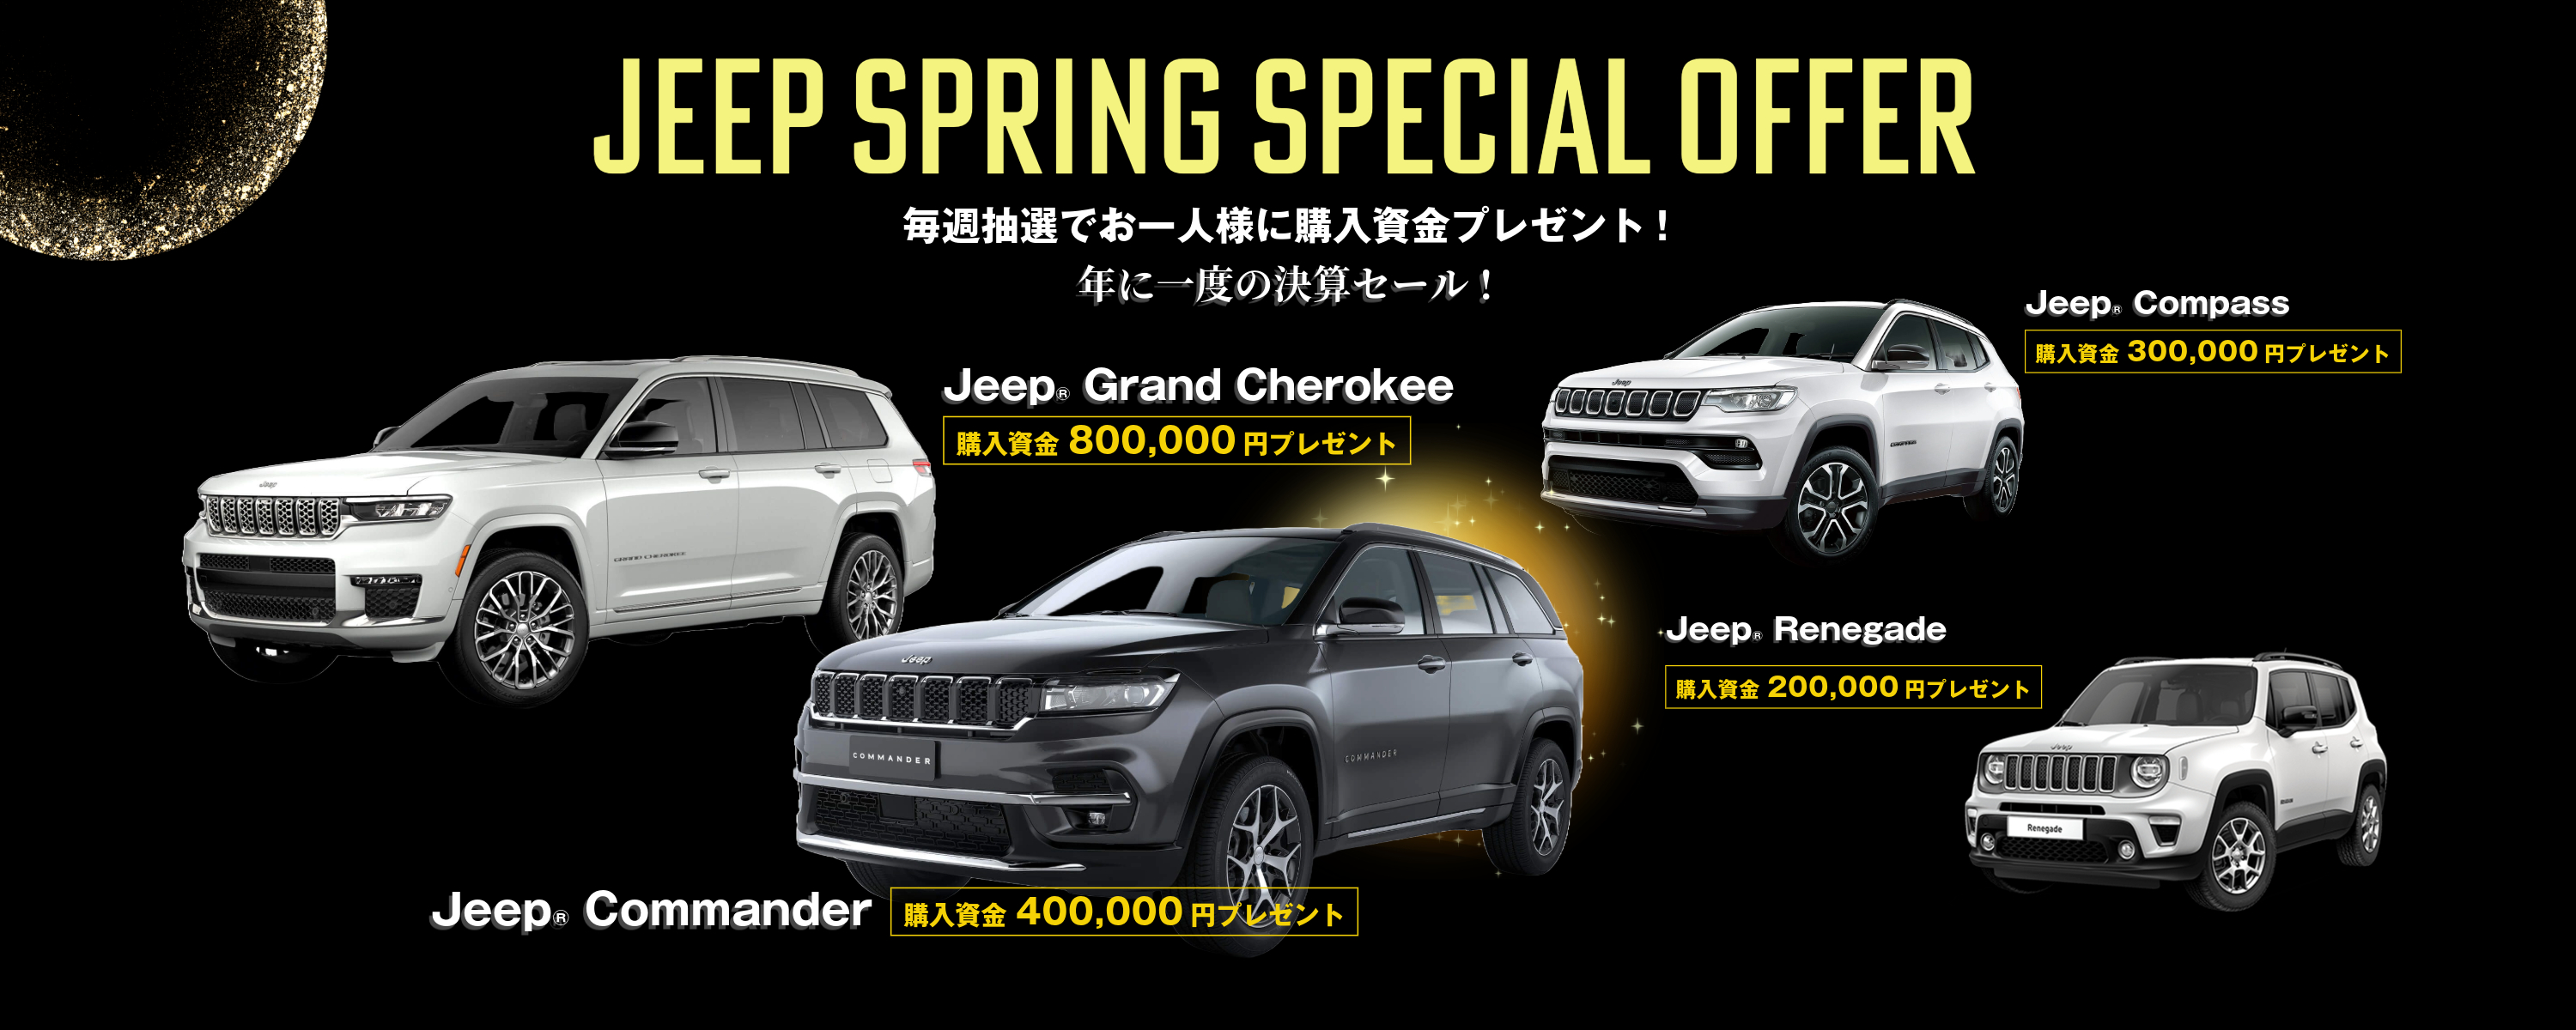 JEEP SPRING SPECIAL OFFER